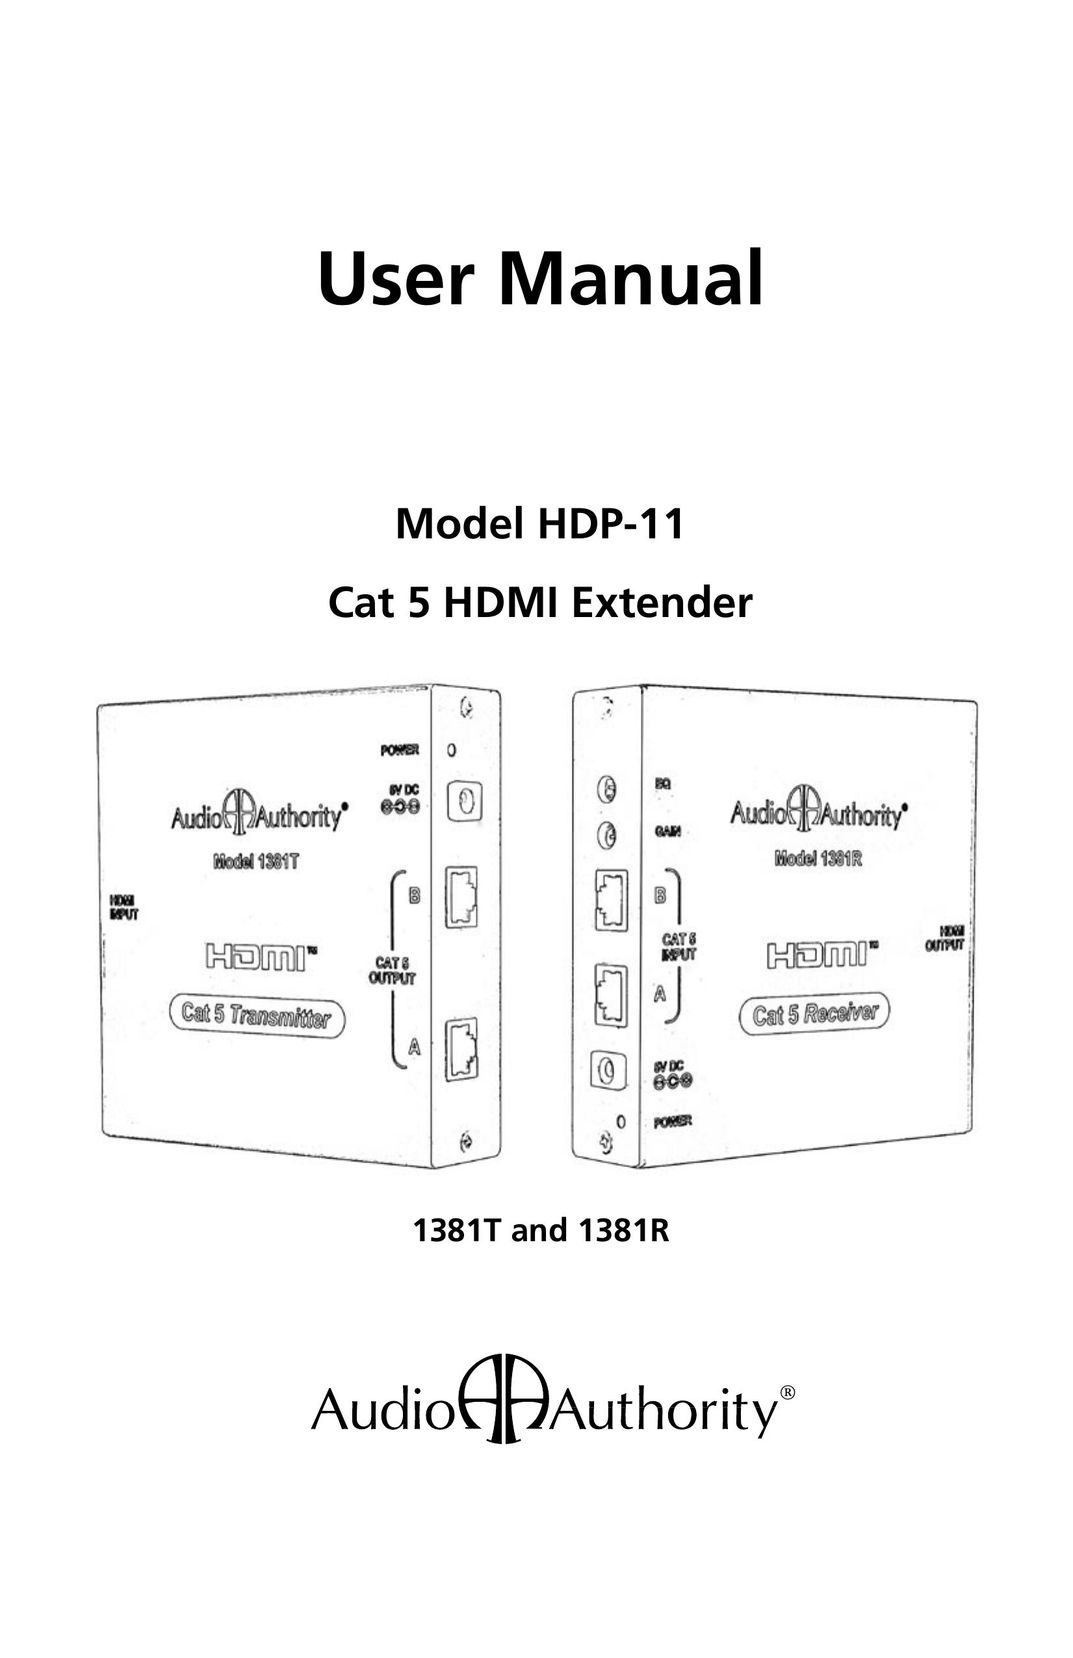 Audio Authority HDP-11 Network Card User Manual